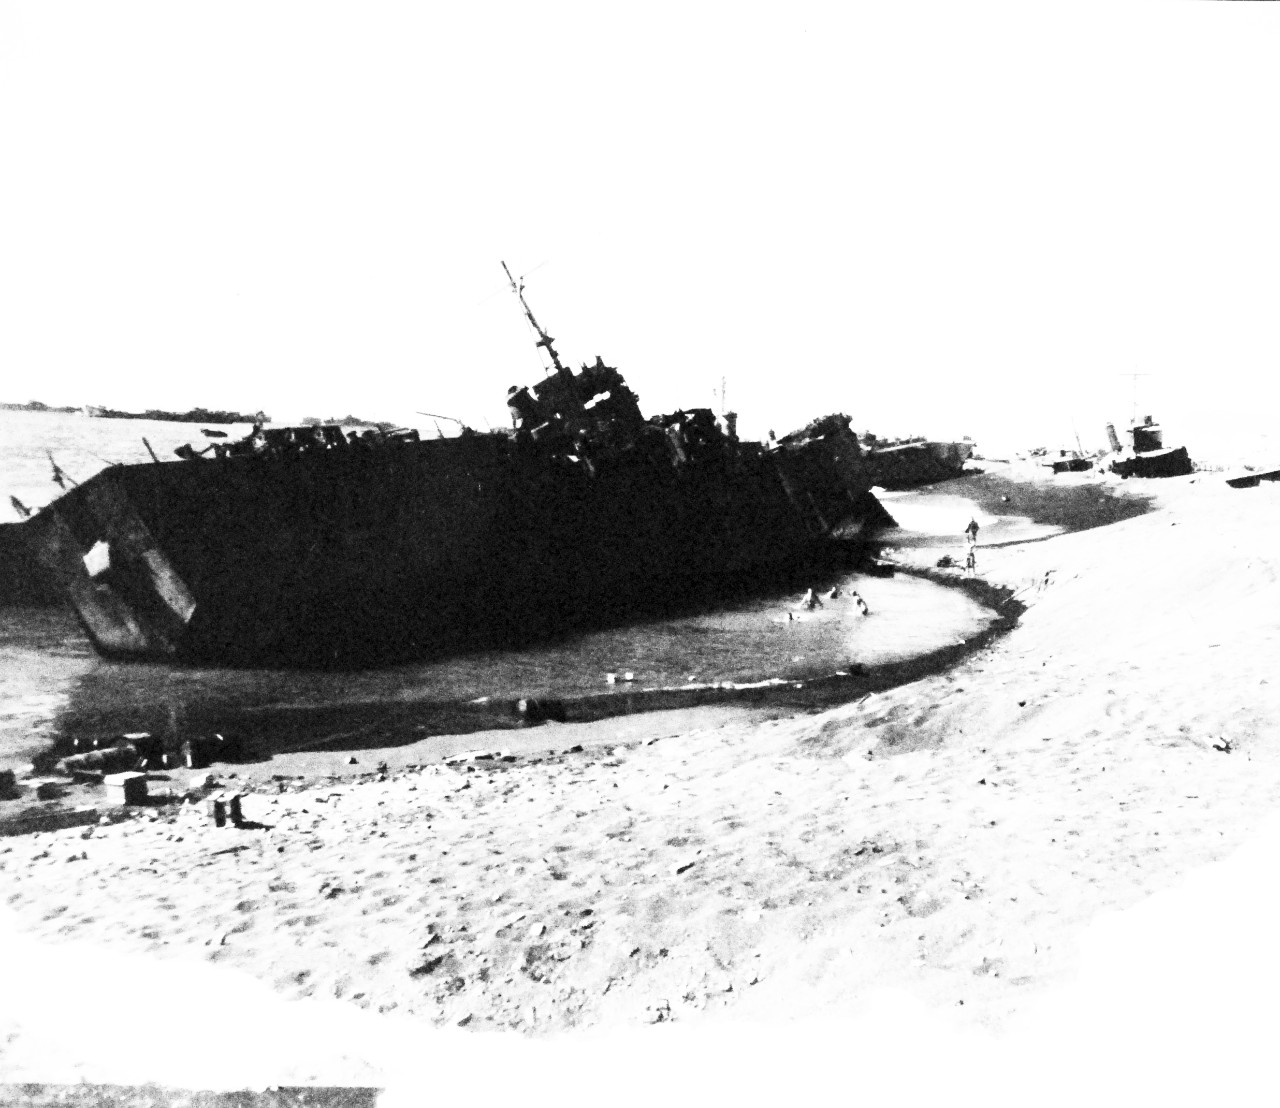 127-GW-304-143185:  Battle for Iwo Jima, February-March 1945.   View showing wrecked Japanese LSMs on Blue Beach #2.  Note steep grade in beach.  Photographed Sgt M. Kauffman, March 1945.  Official U.S. Marine Corps photograph, now in the collections of the National Archives.  (2016/02/17).  Note, photograph is damaged.  